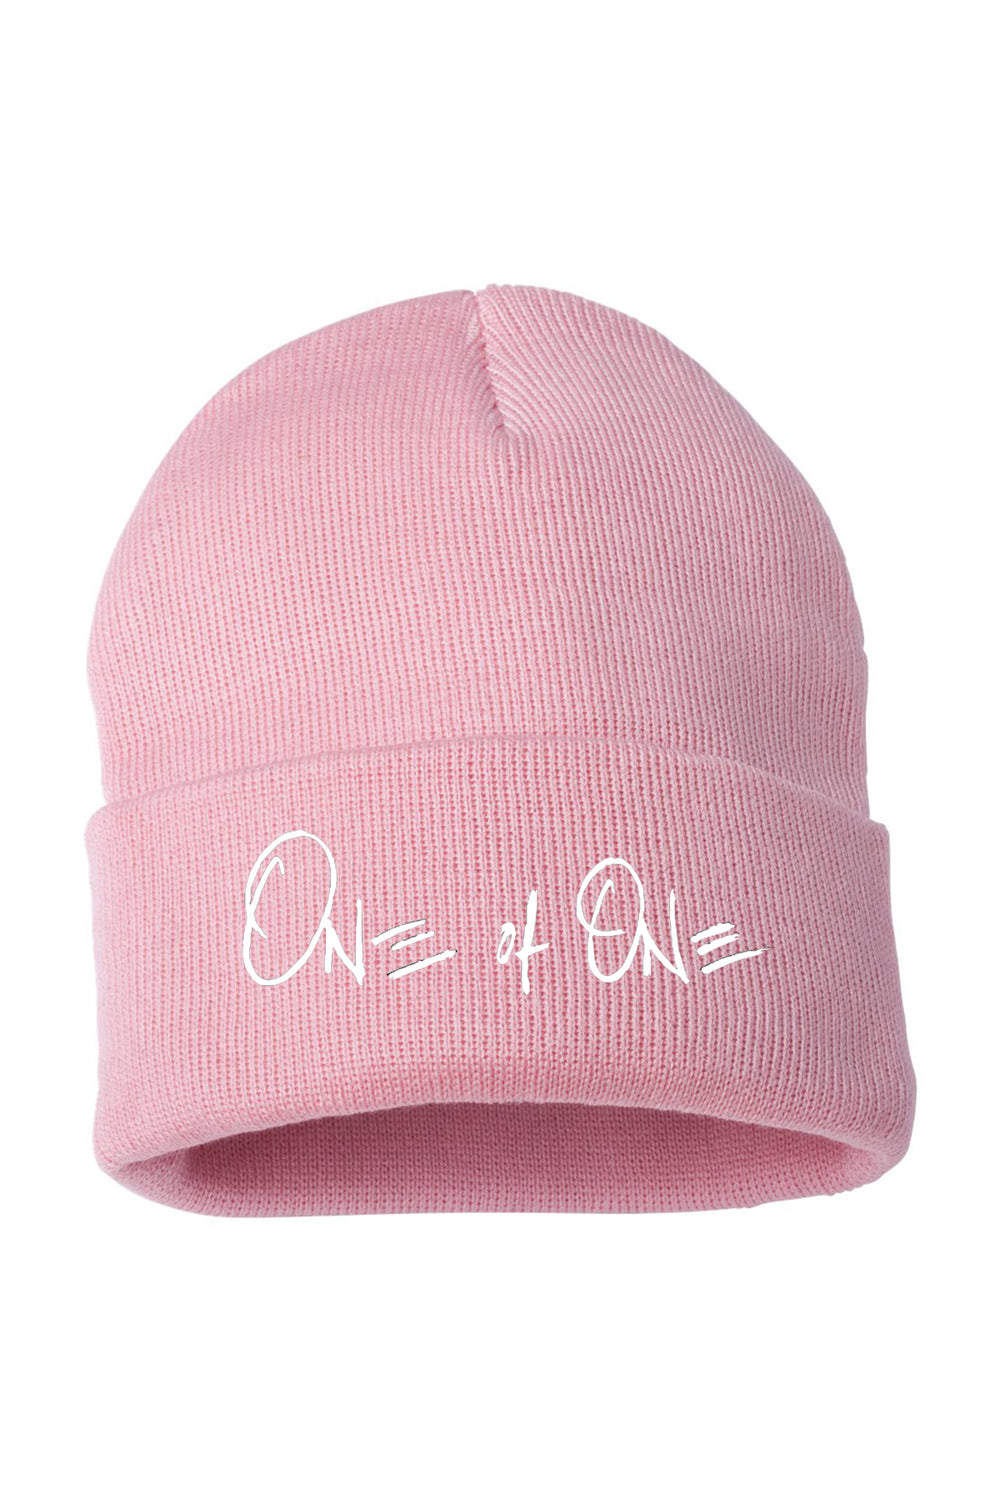 One Of One Cuffed Beanie [Light Pink]